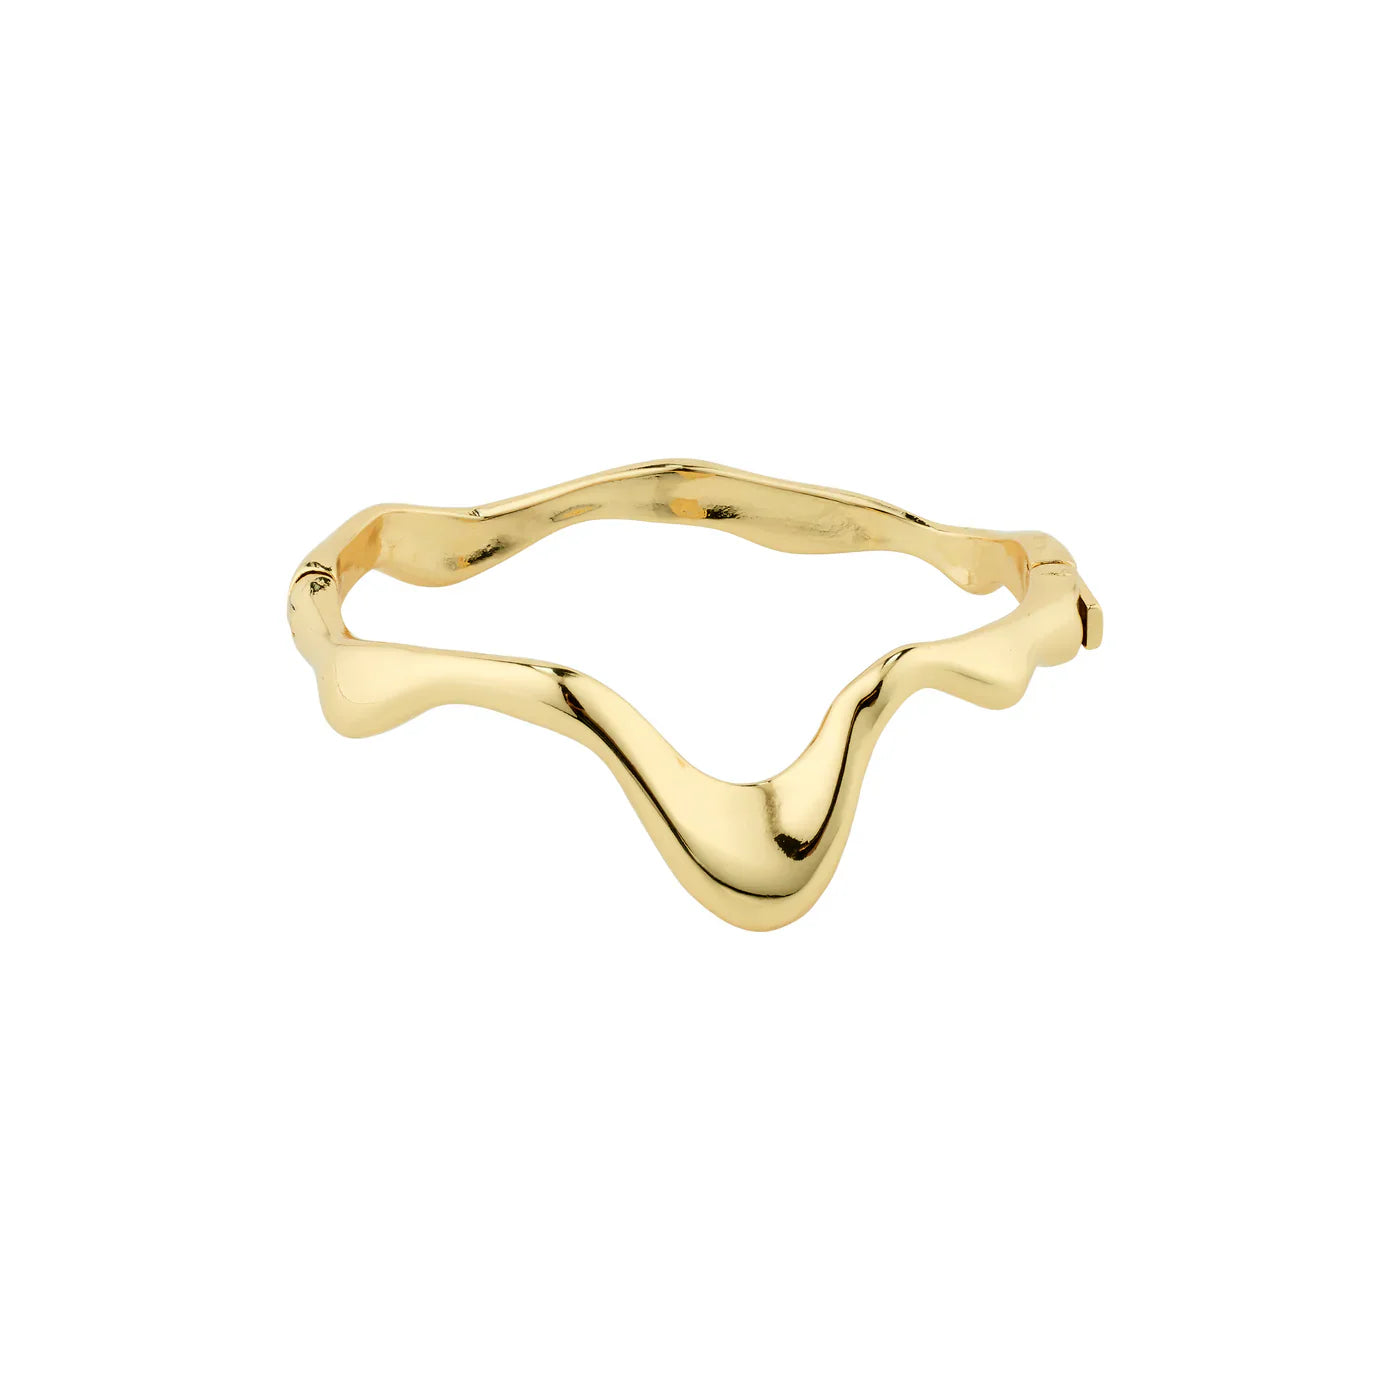 MOON RECYCLED BANGLE GOLD PLATED